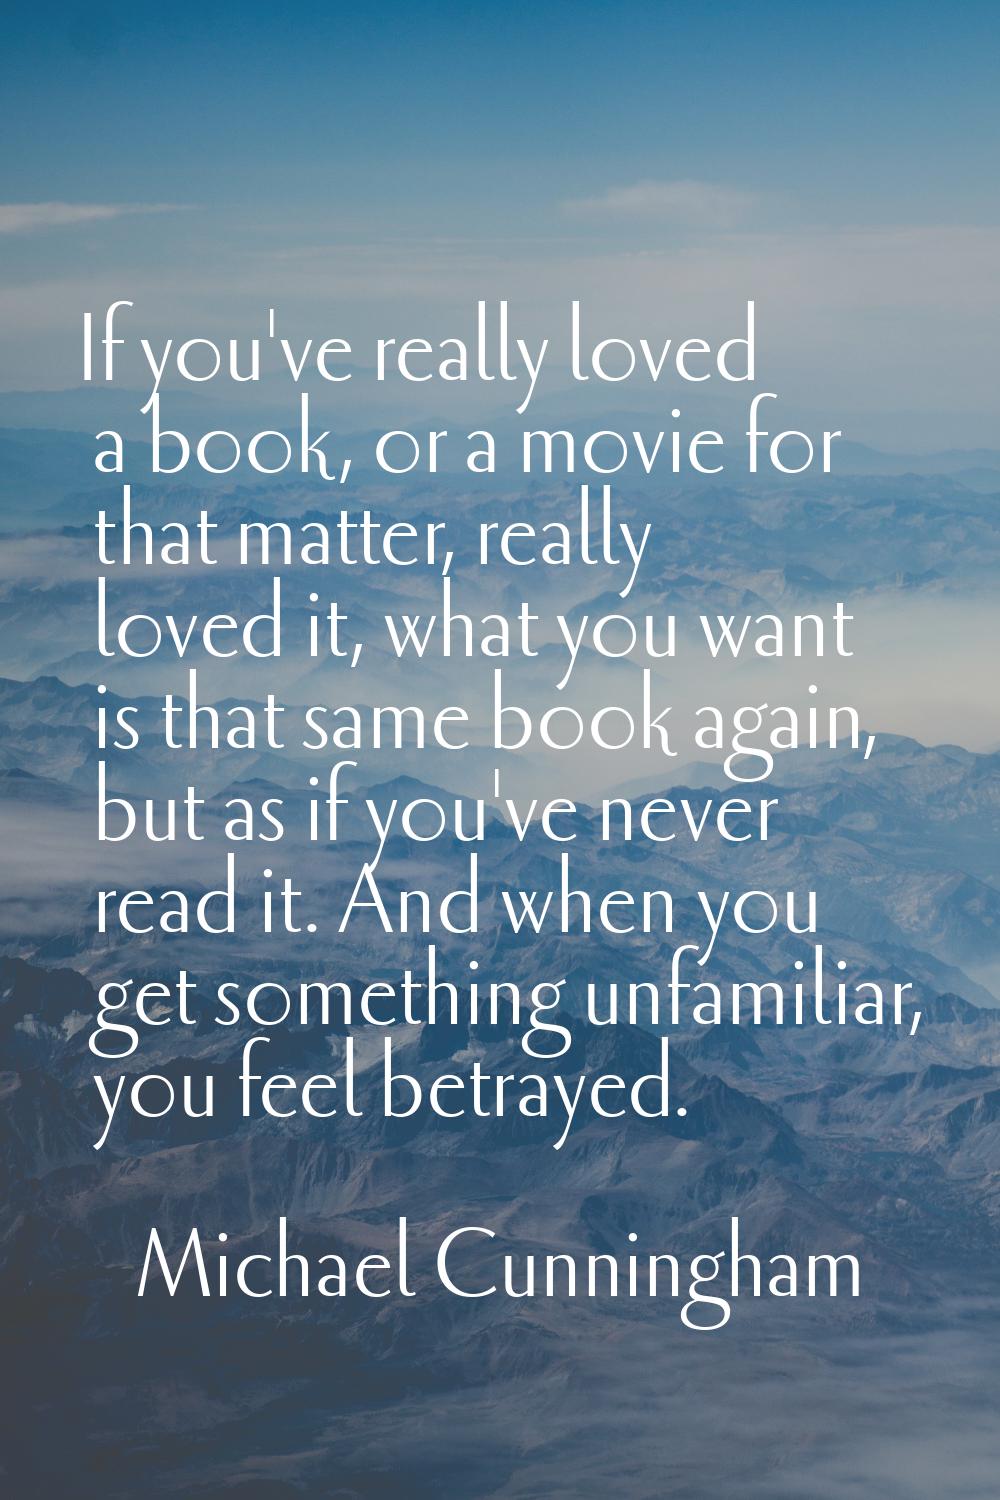 If you've really loved a book, or a movie for that matter, really loved it, what you want is that s